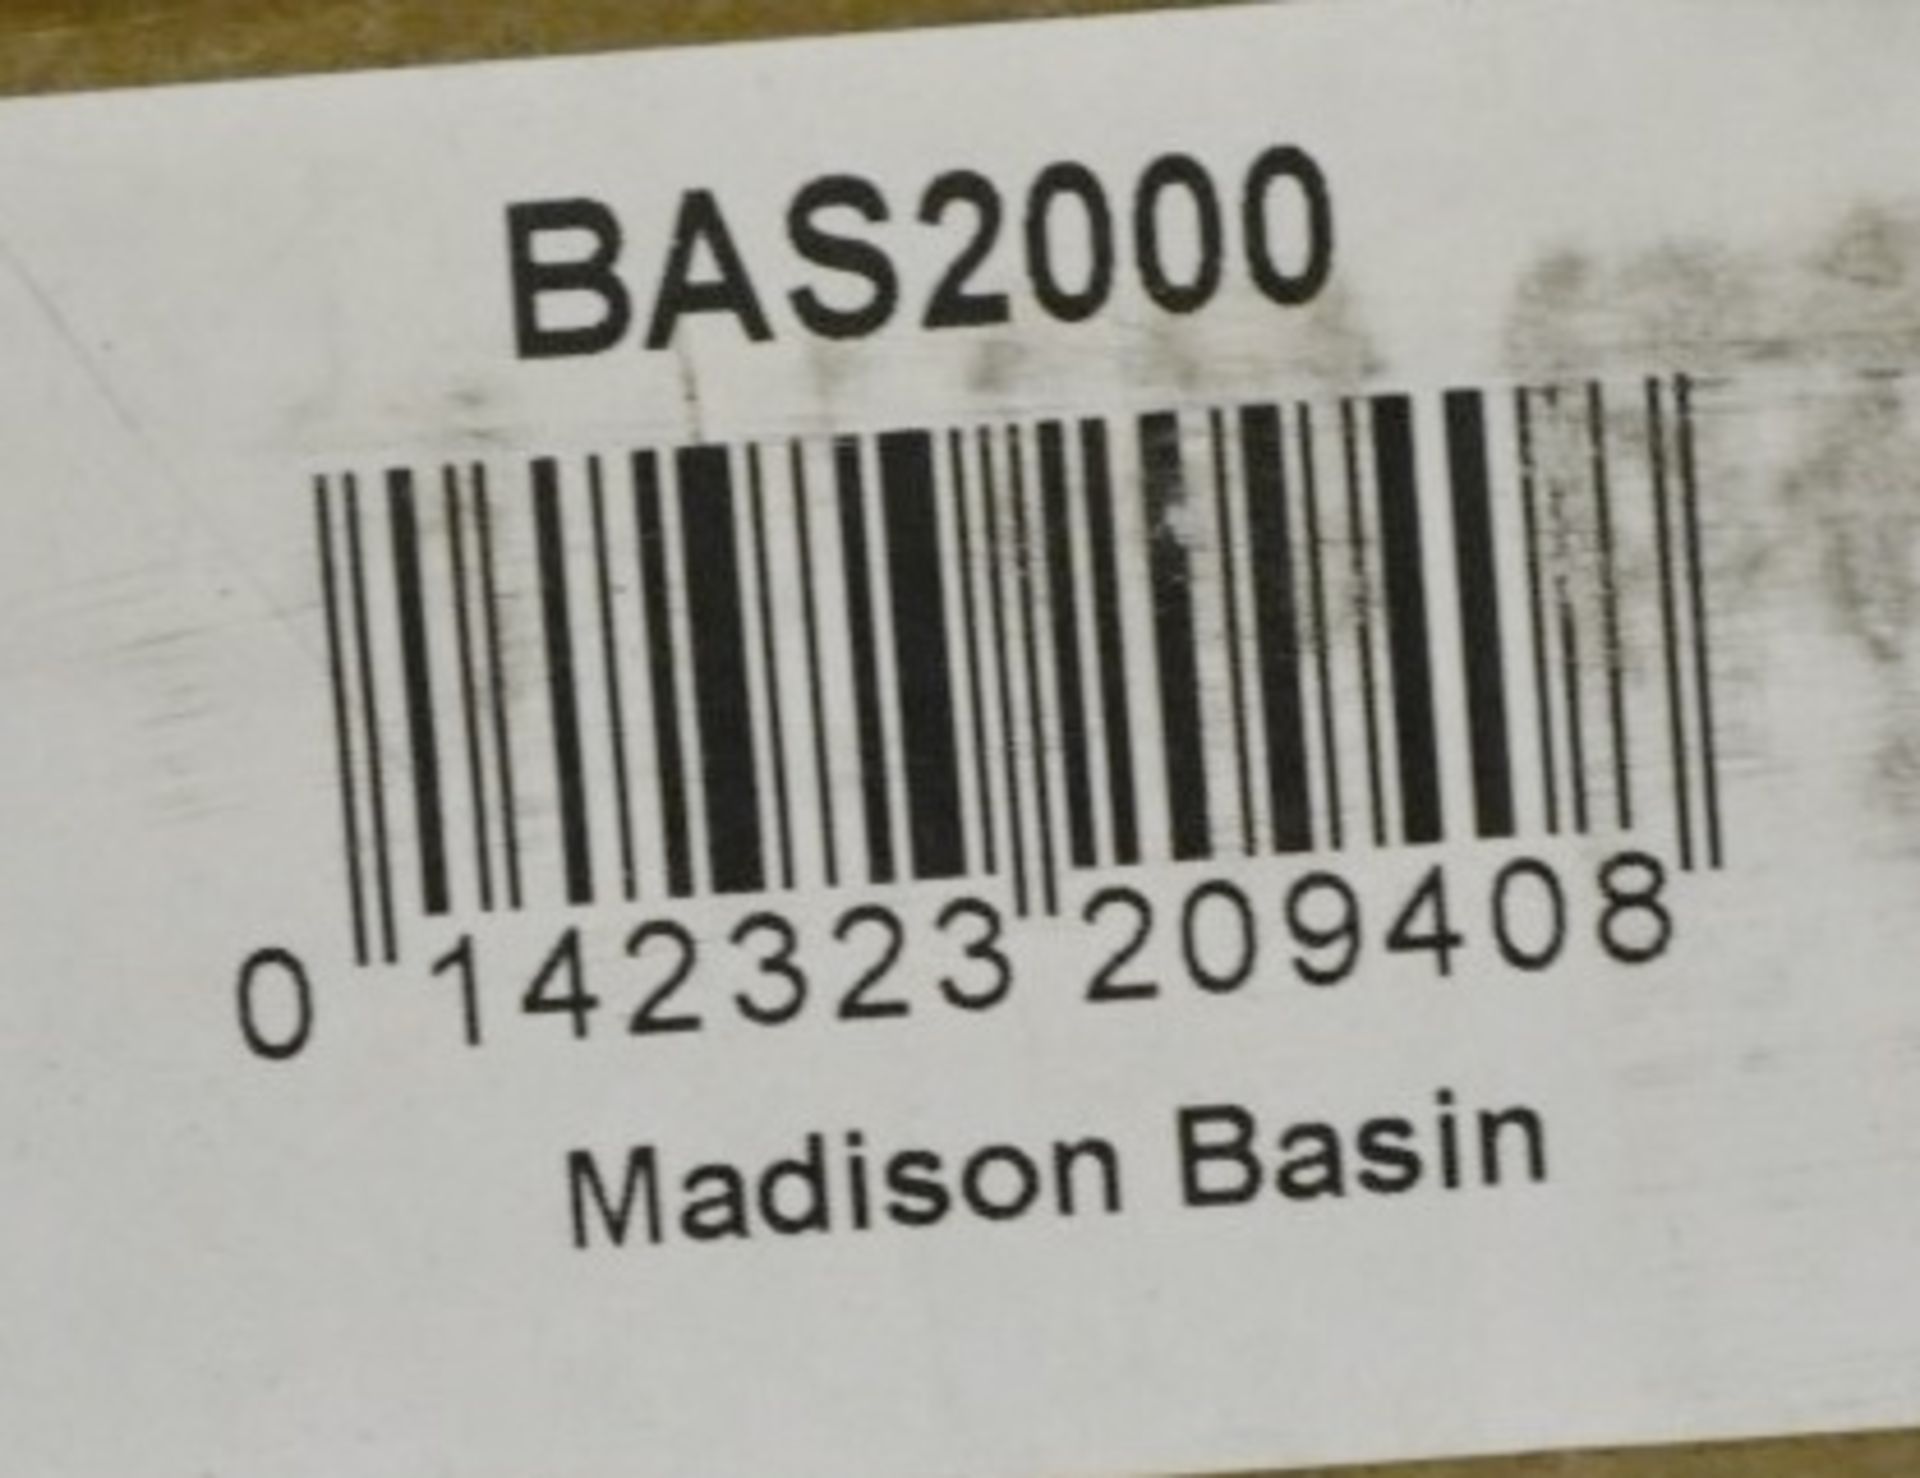 1 x MADISON Basin With Pedestal (BAS2000) - Dimensions: - Ref: GMB066 - CL190 - Unused Stock - - Image 2 of 4